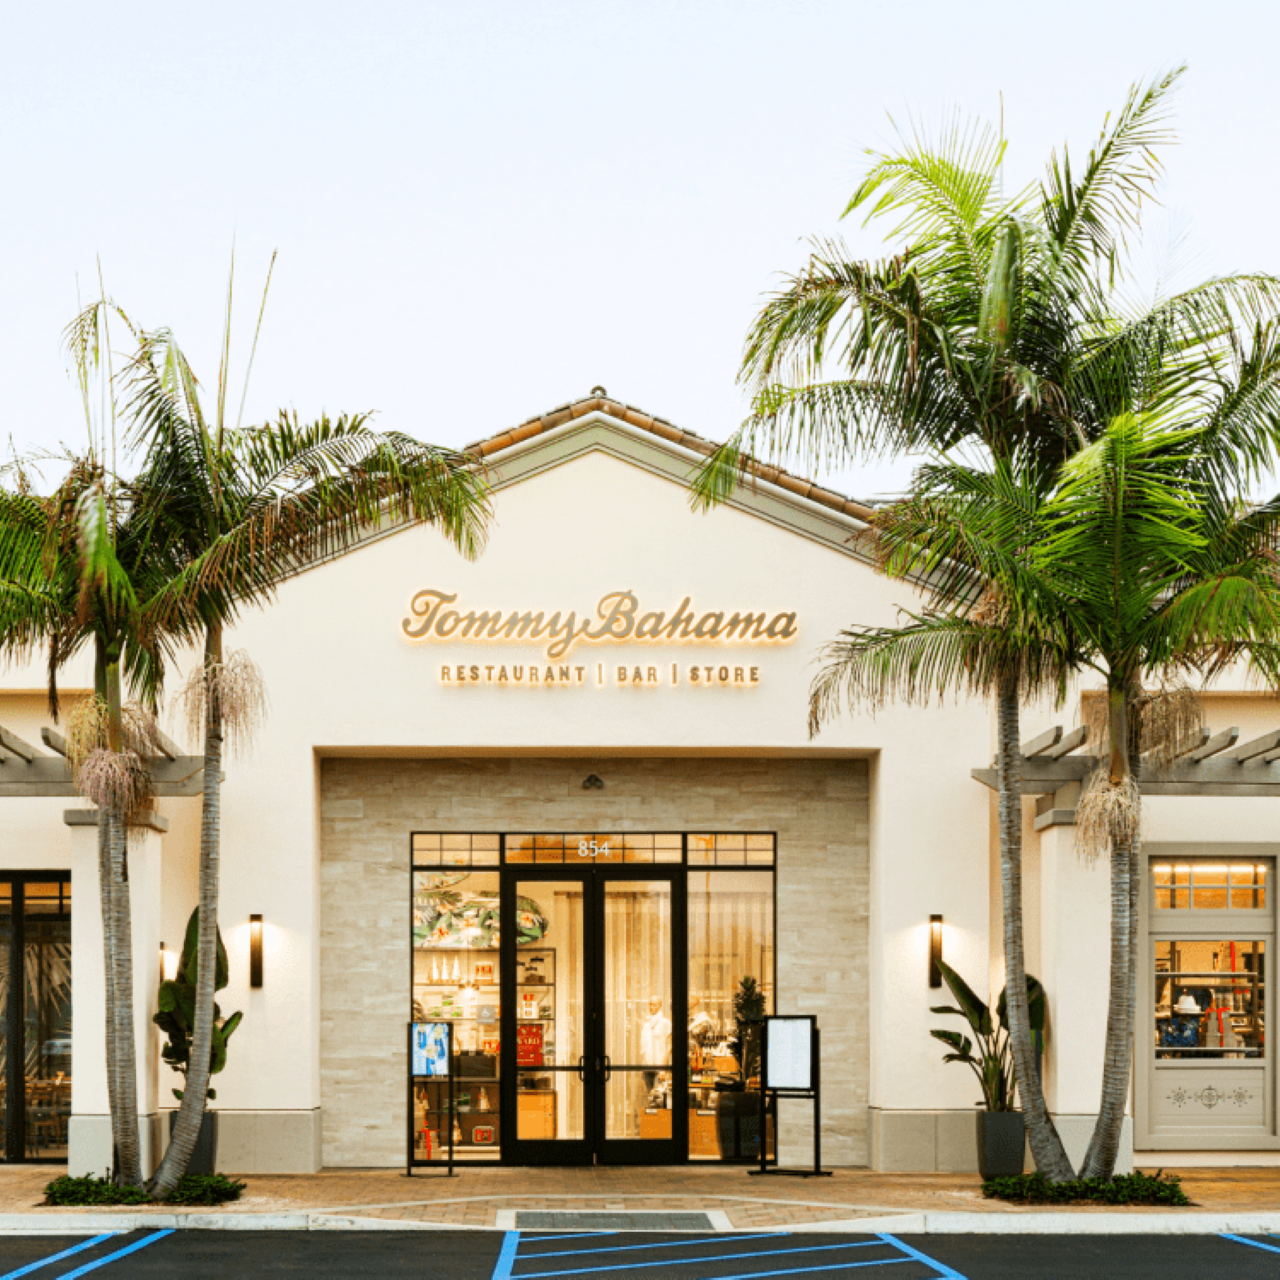 Tommy Bahama - Tommy Bahama updated their cover photo.